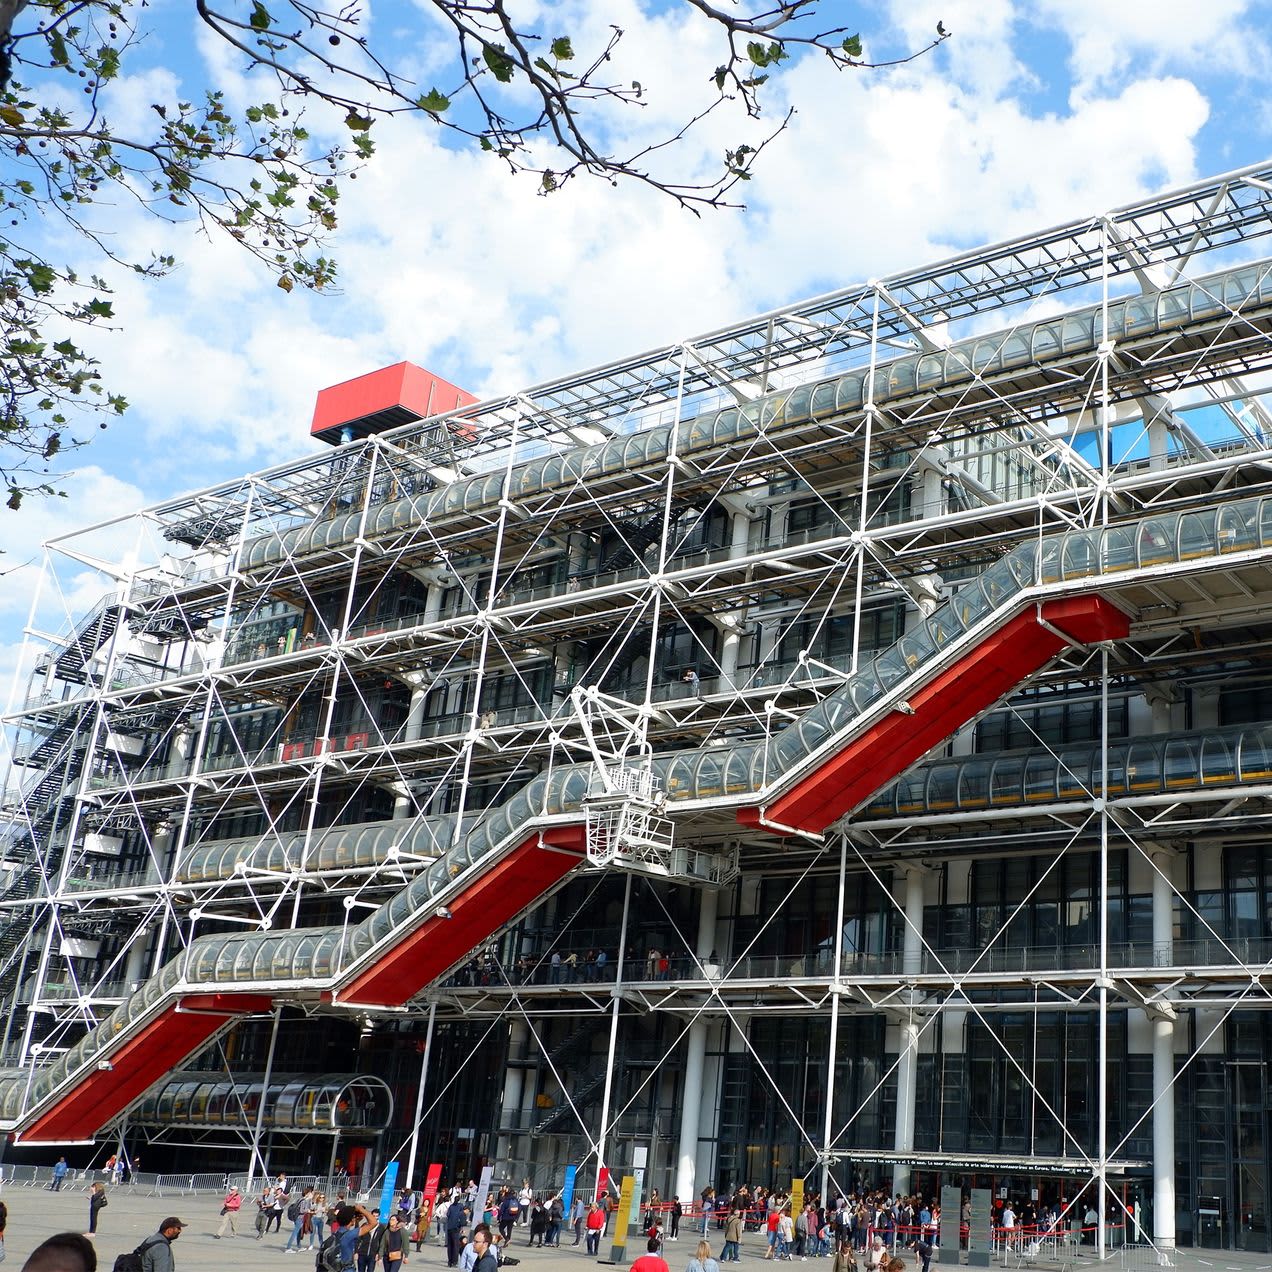 The Centre Pompidou in Paris is an iconic landmark with a museum of modern art, temporary exhibitions, theaters and a public library. Its spectacular aluminum architecture makes it a symbol of modern art.